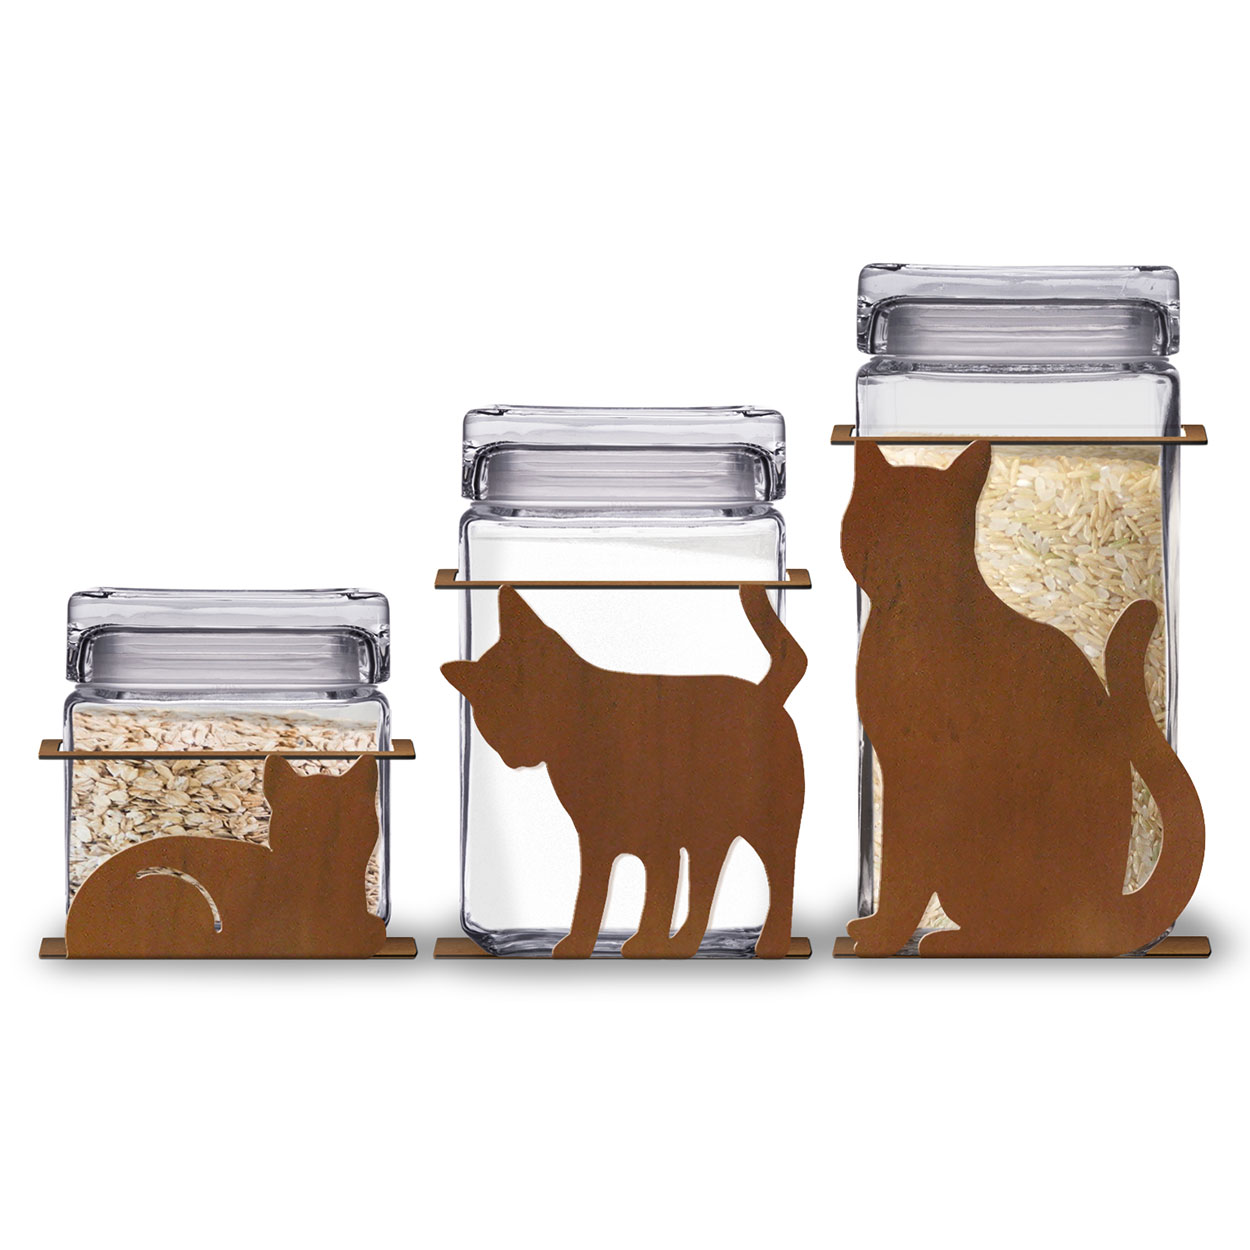 620017R - Cats 3-Piece Kitchen Canister Set in Rust Patina